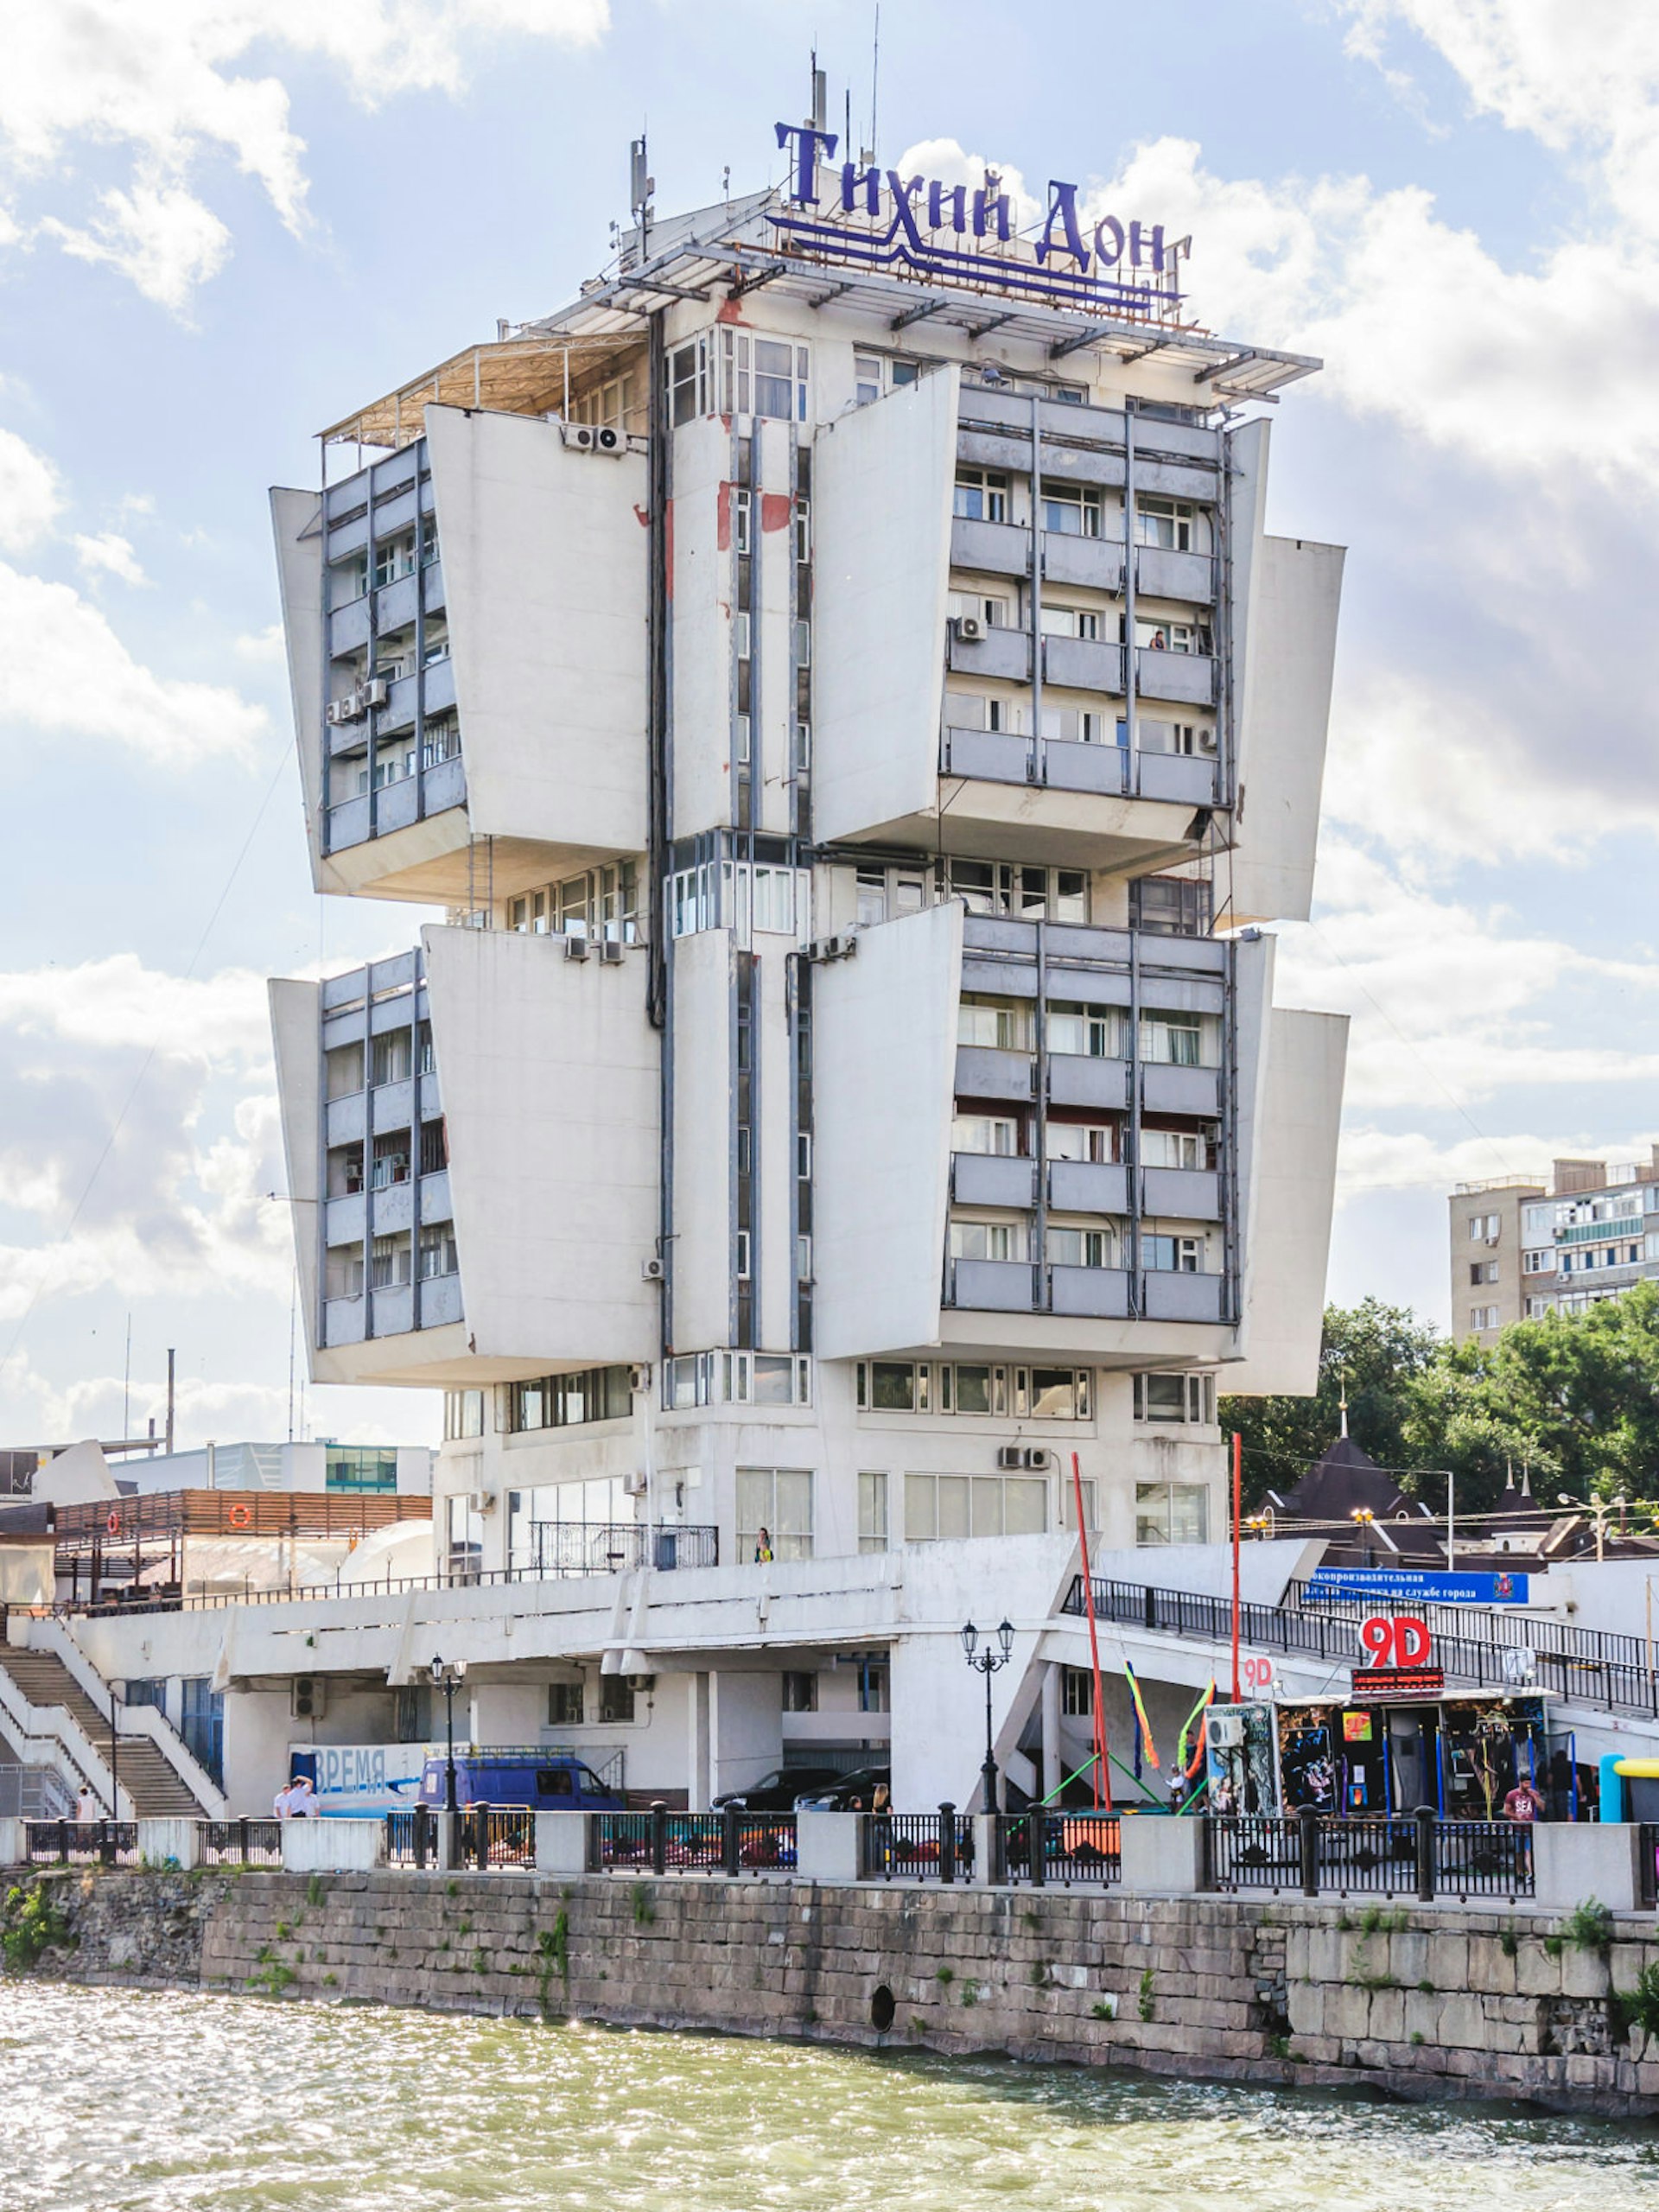 The high-rise building of the river station in Rostov-on-Don, formerly The Anchor hotel © Aleoks / Shutterstock